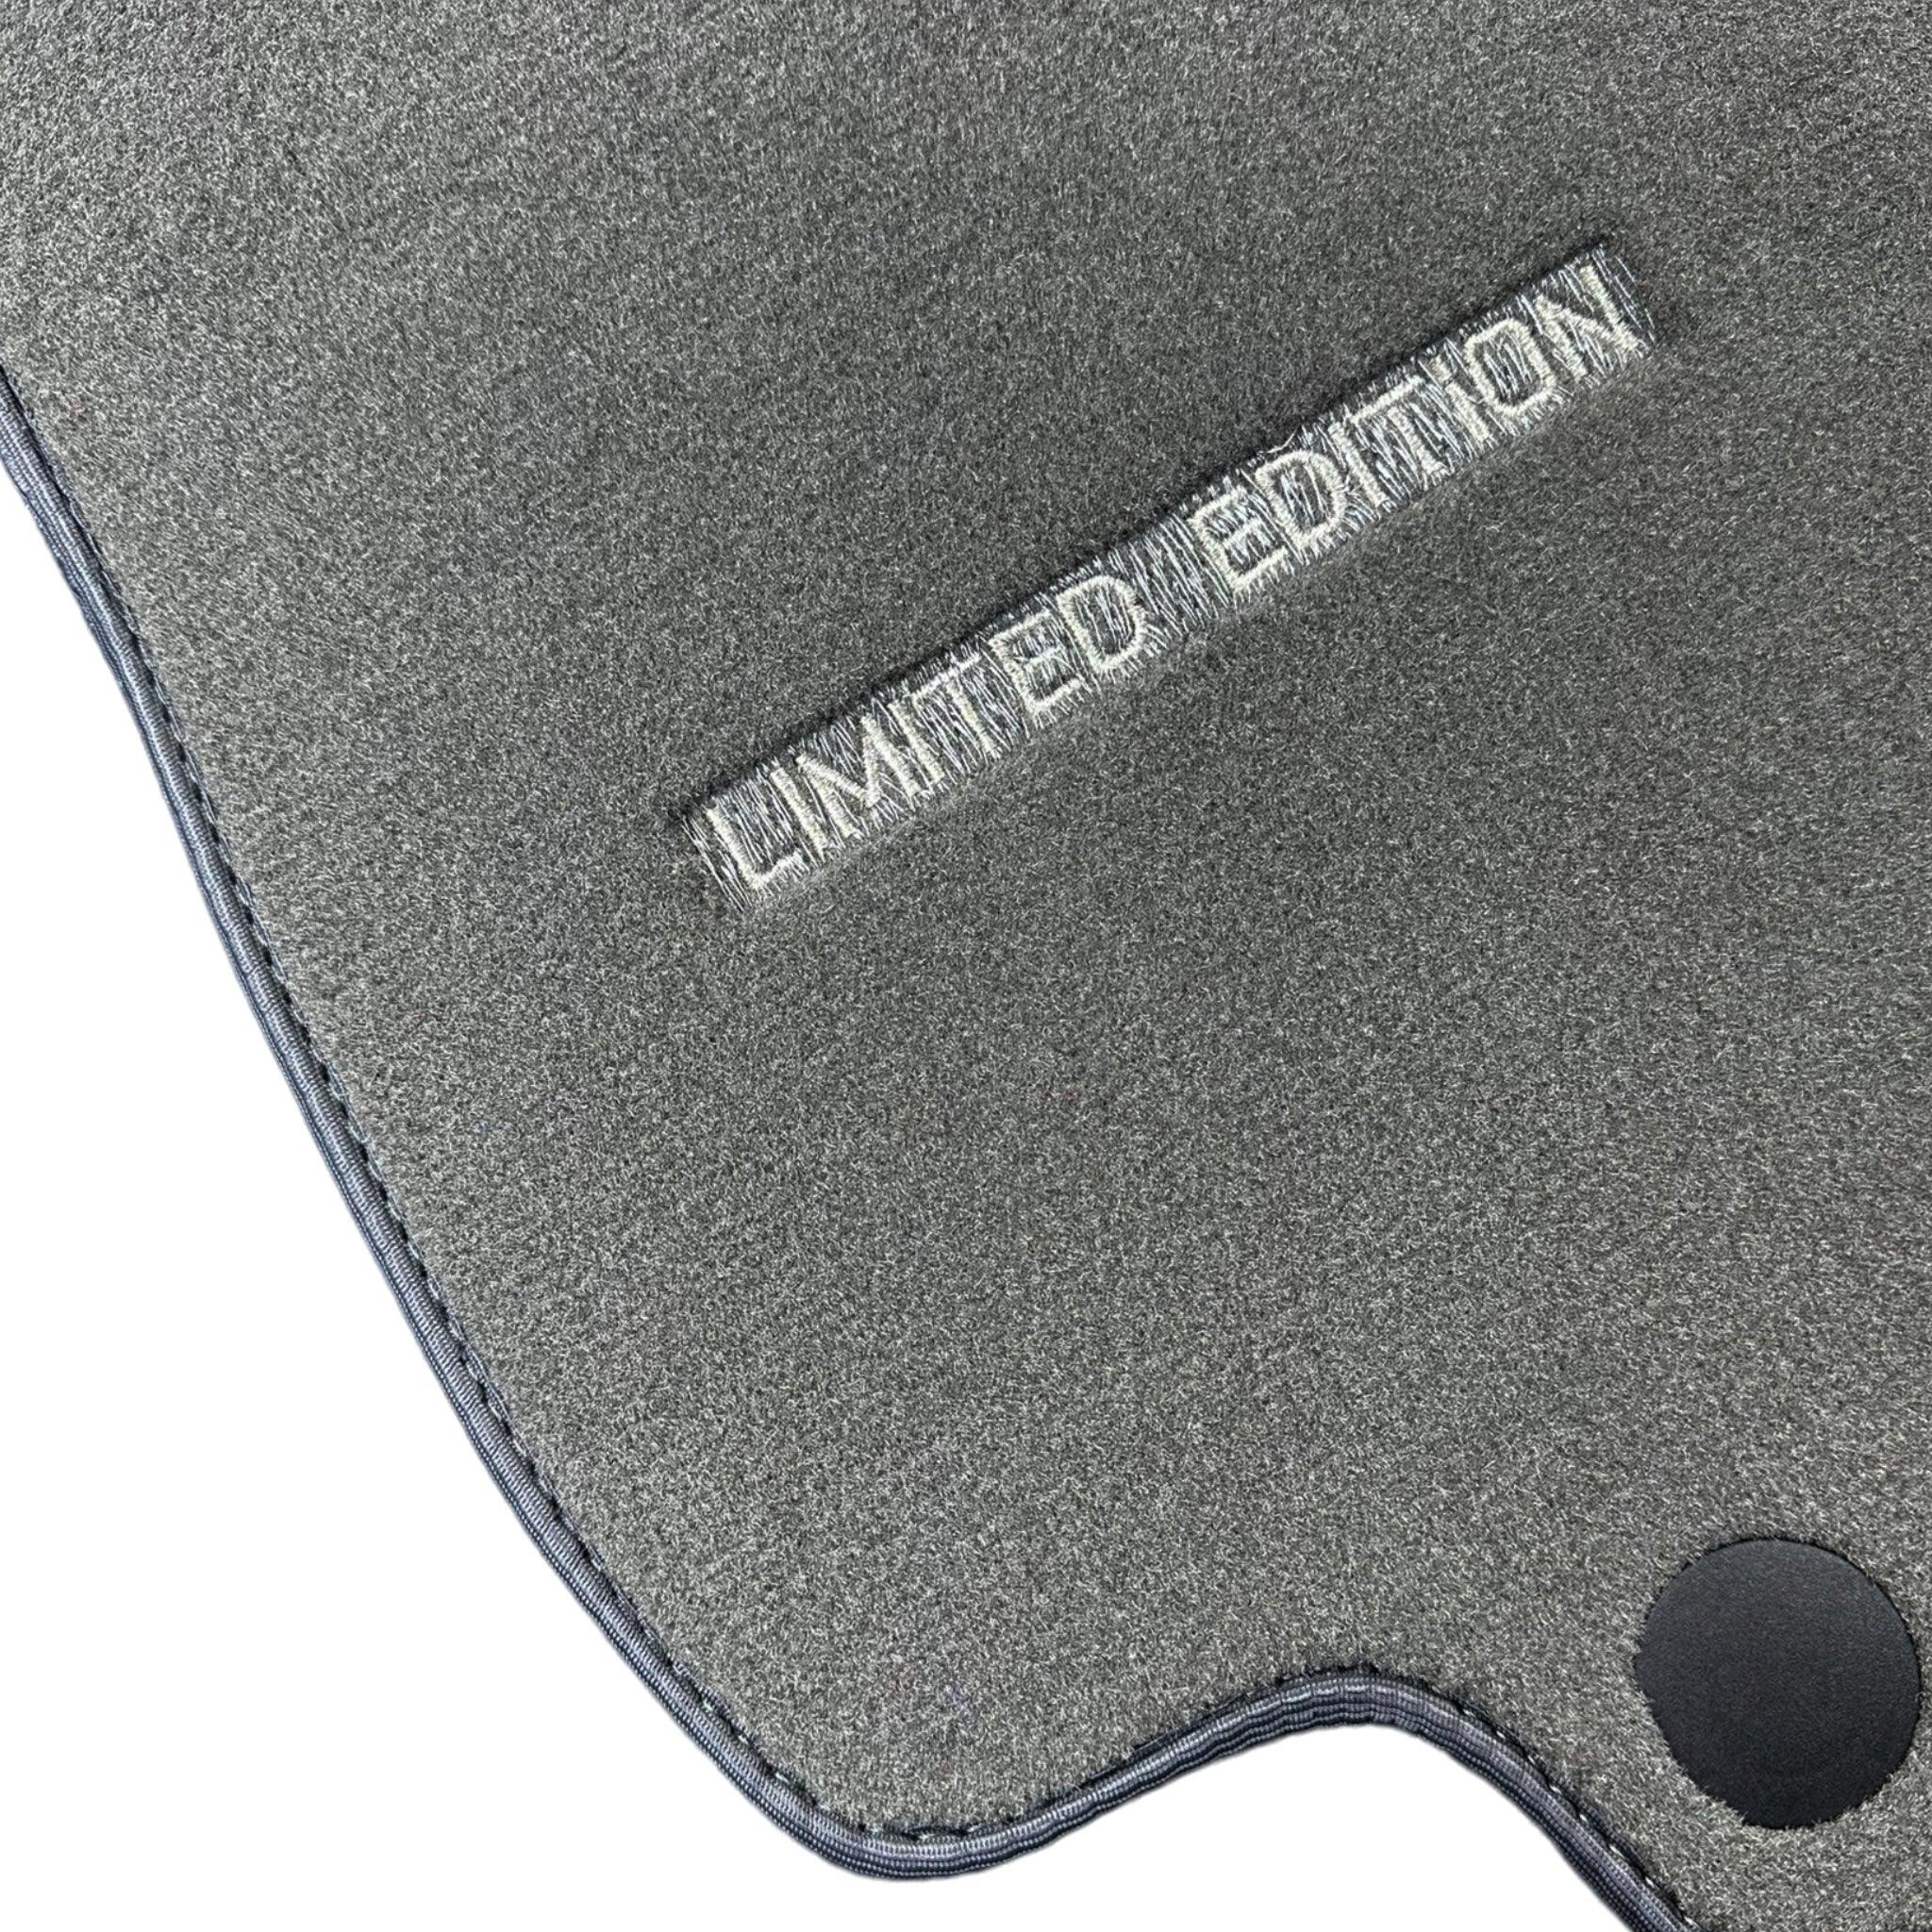 Gray Floor Mats For Mercedes Benz A-Class W177 Hybrid (2019-2023) | Limited Edition